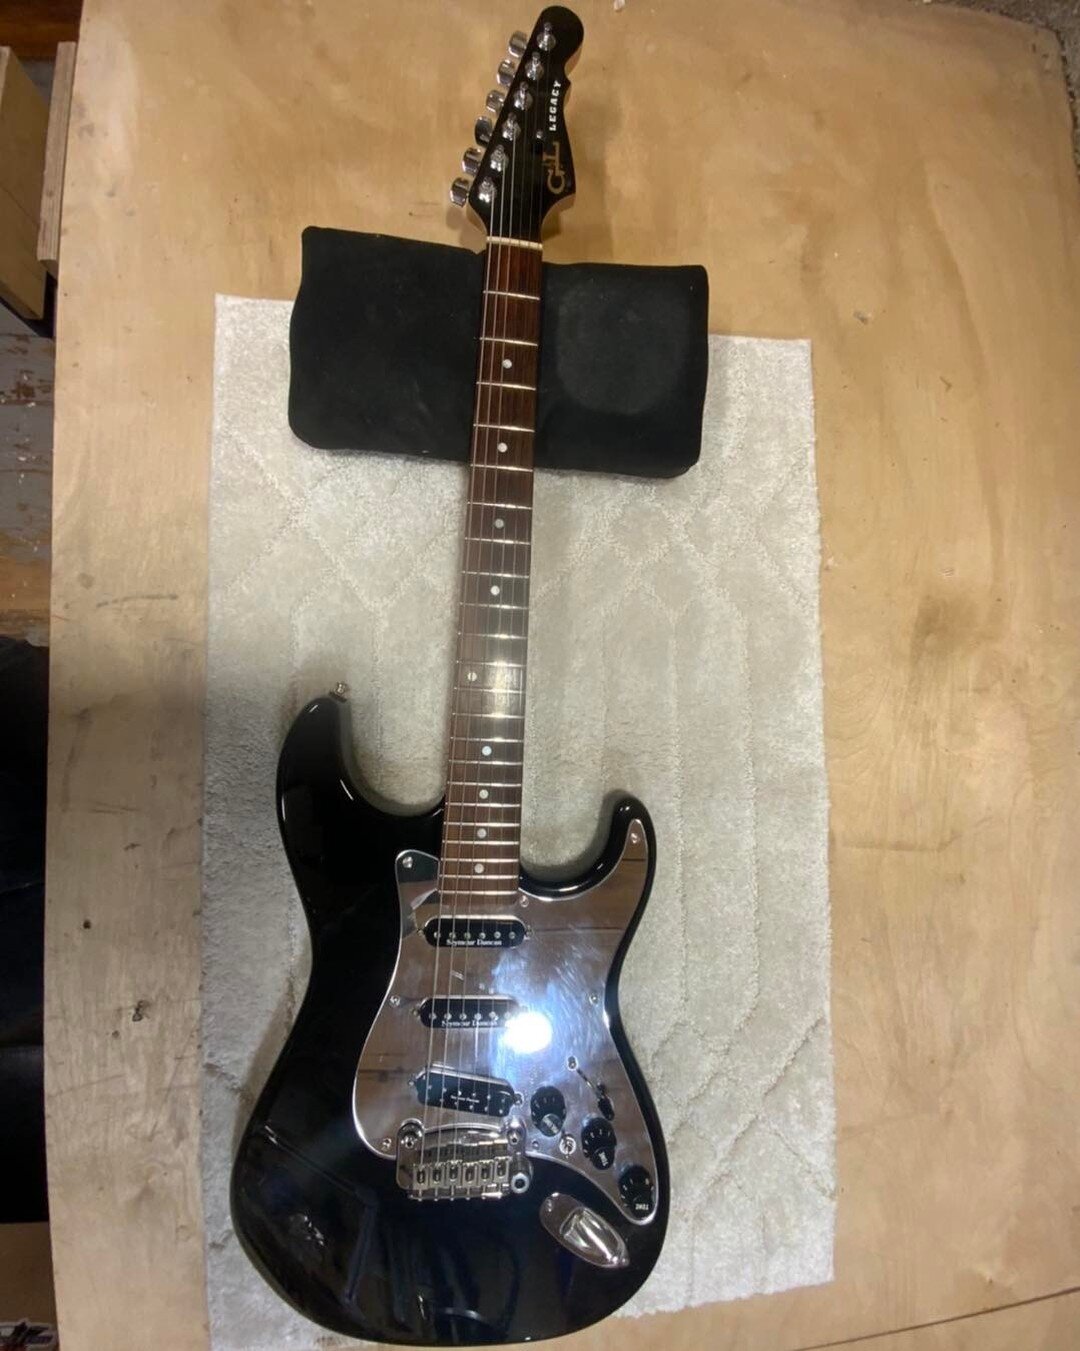 A nice 1998 G&amp;L Legacy came in, it&rsquo;s truss rod spinnin&rsquo; in the butter, turns out its just stripped threads on the bullet nut.

By the way, empty Stringjoy string packages are really nice for tucking loose strings safely out of the way